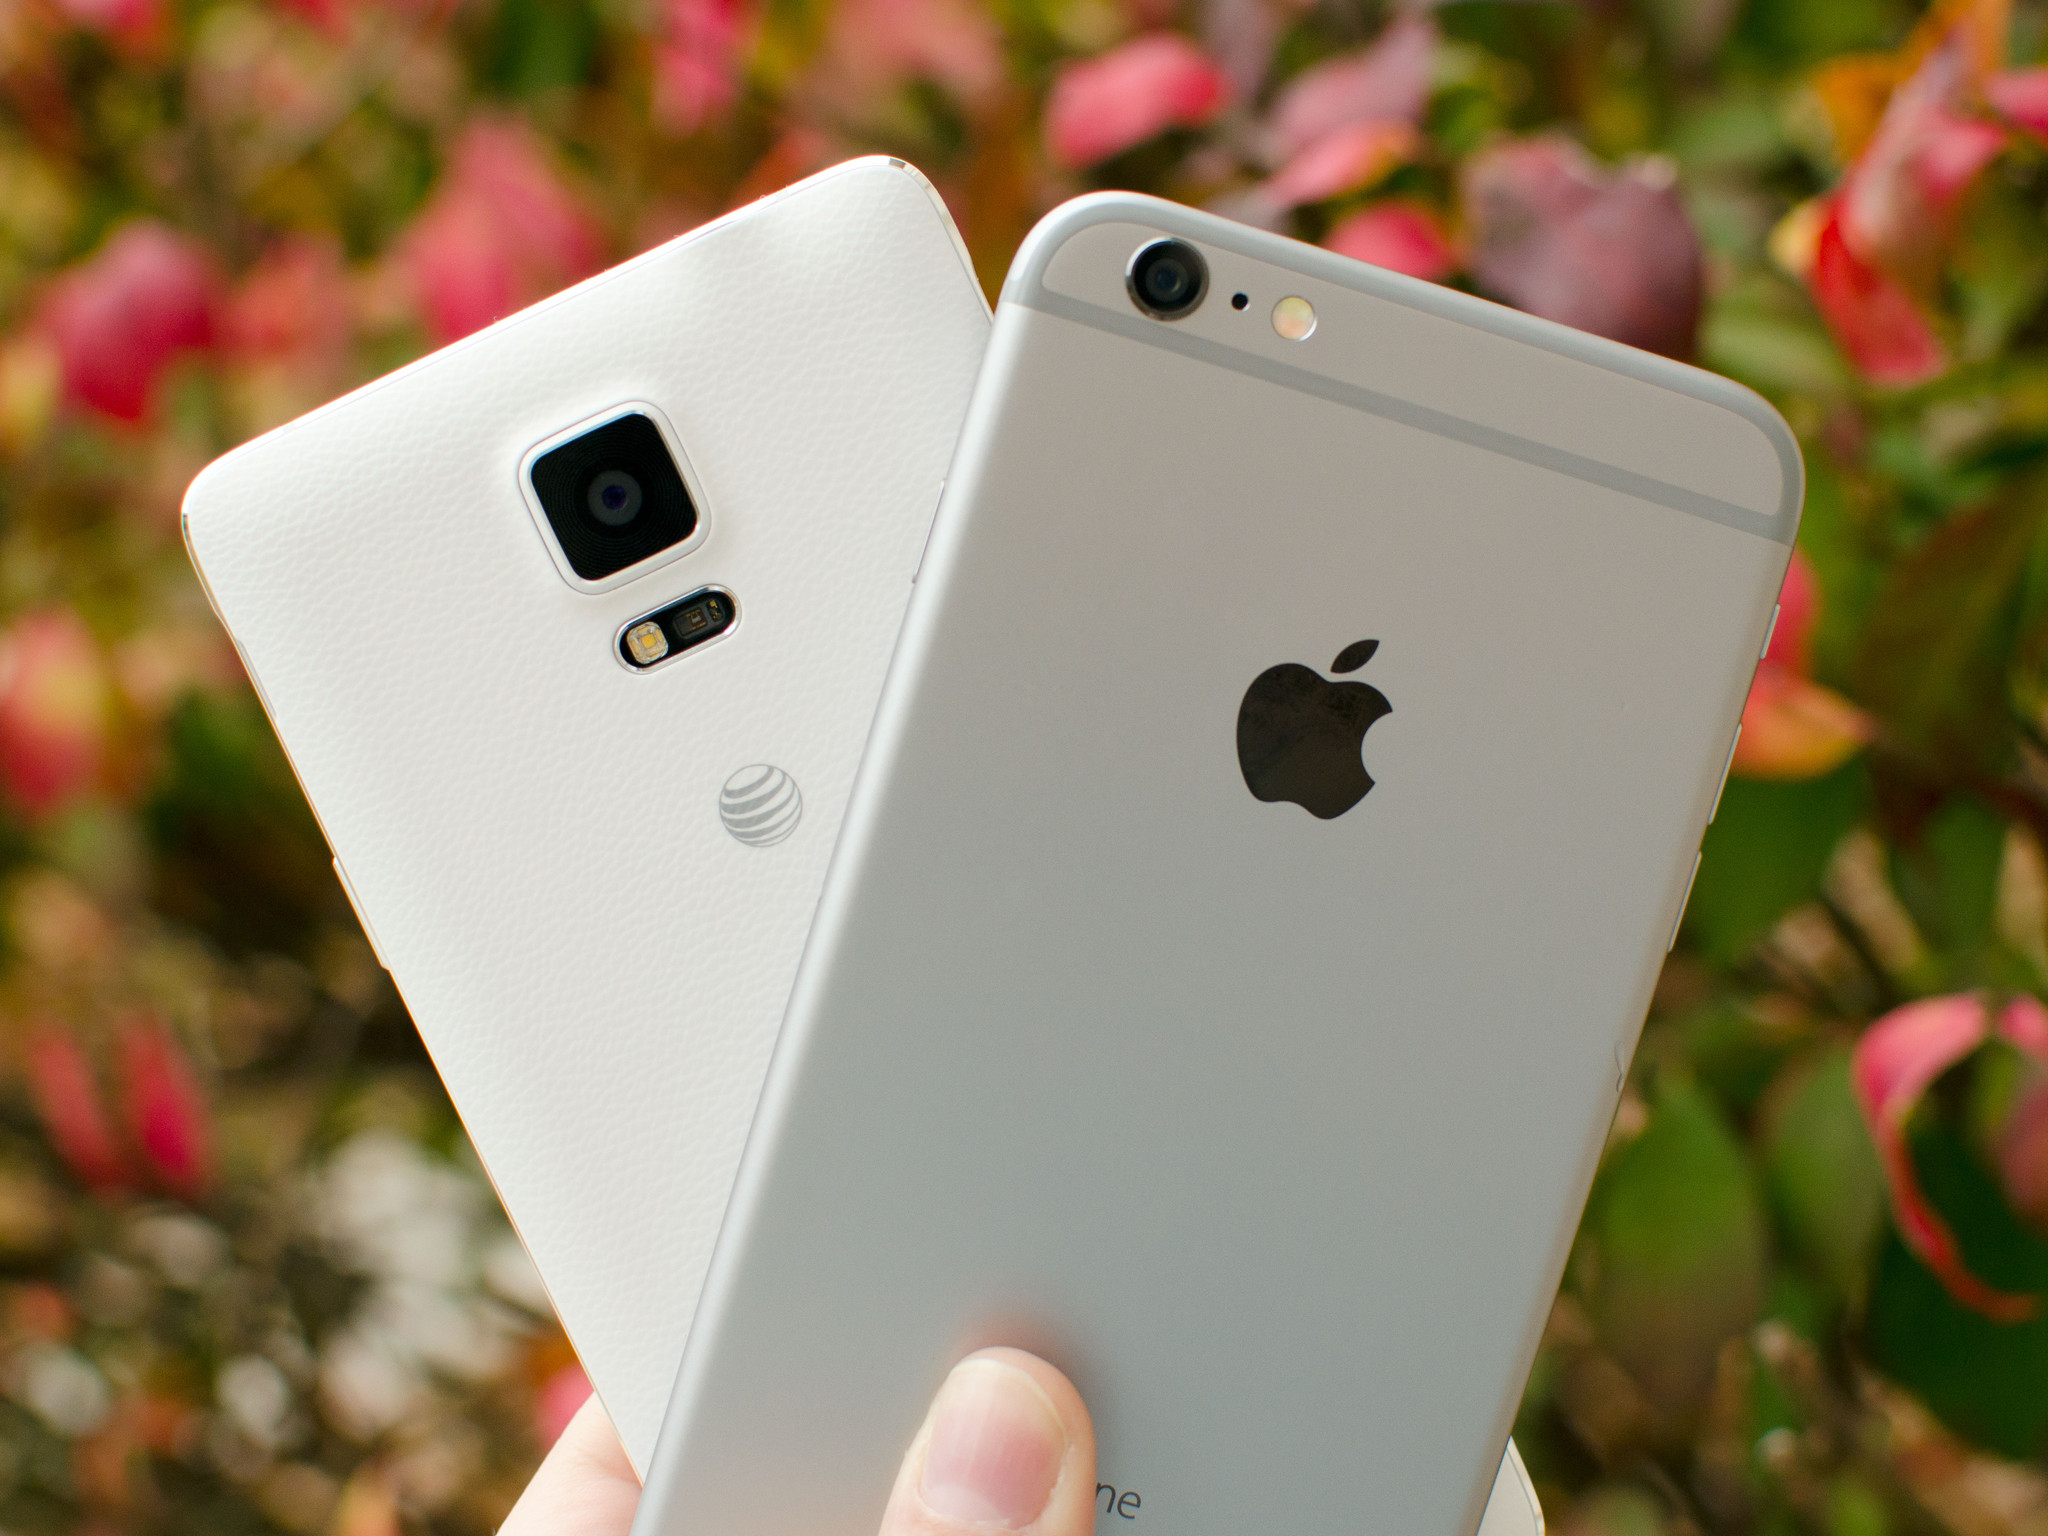 Did you dump your Android phone for an iPhone 6?